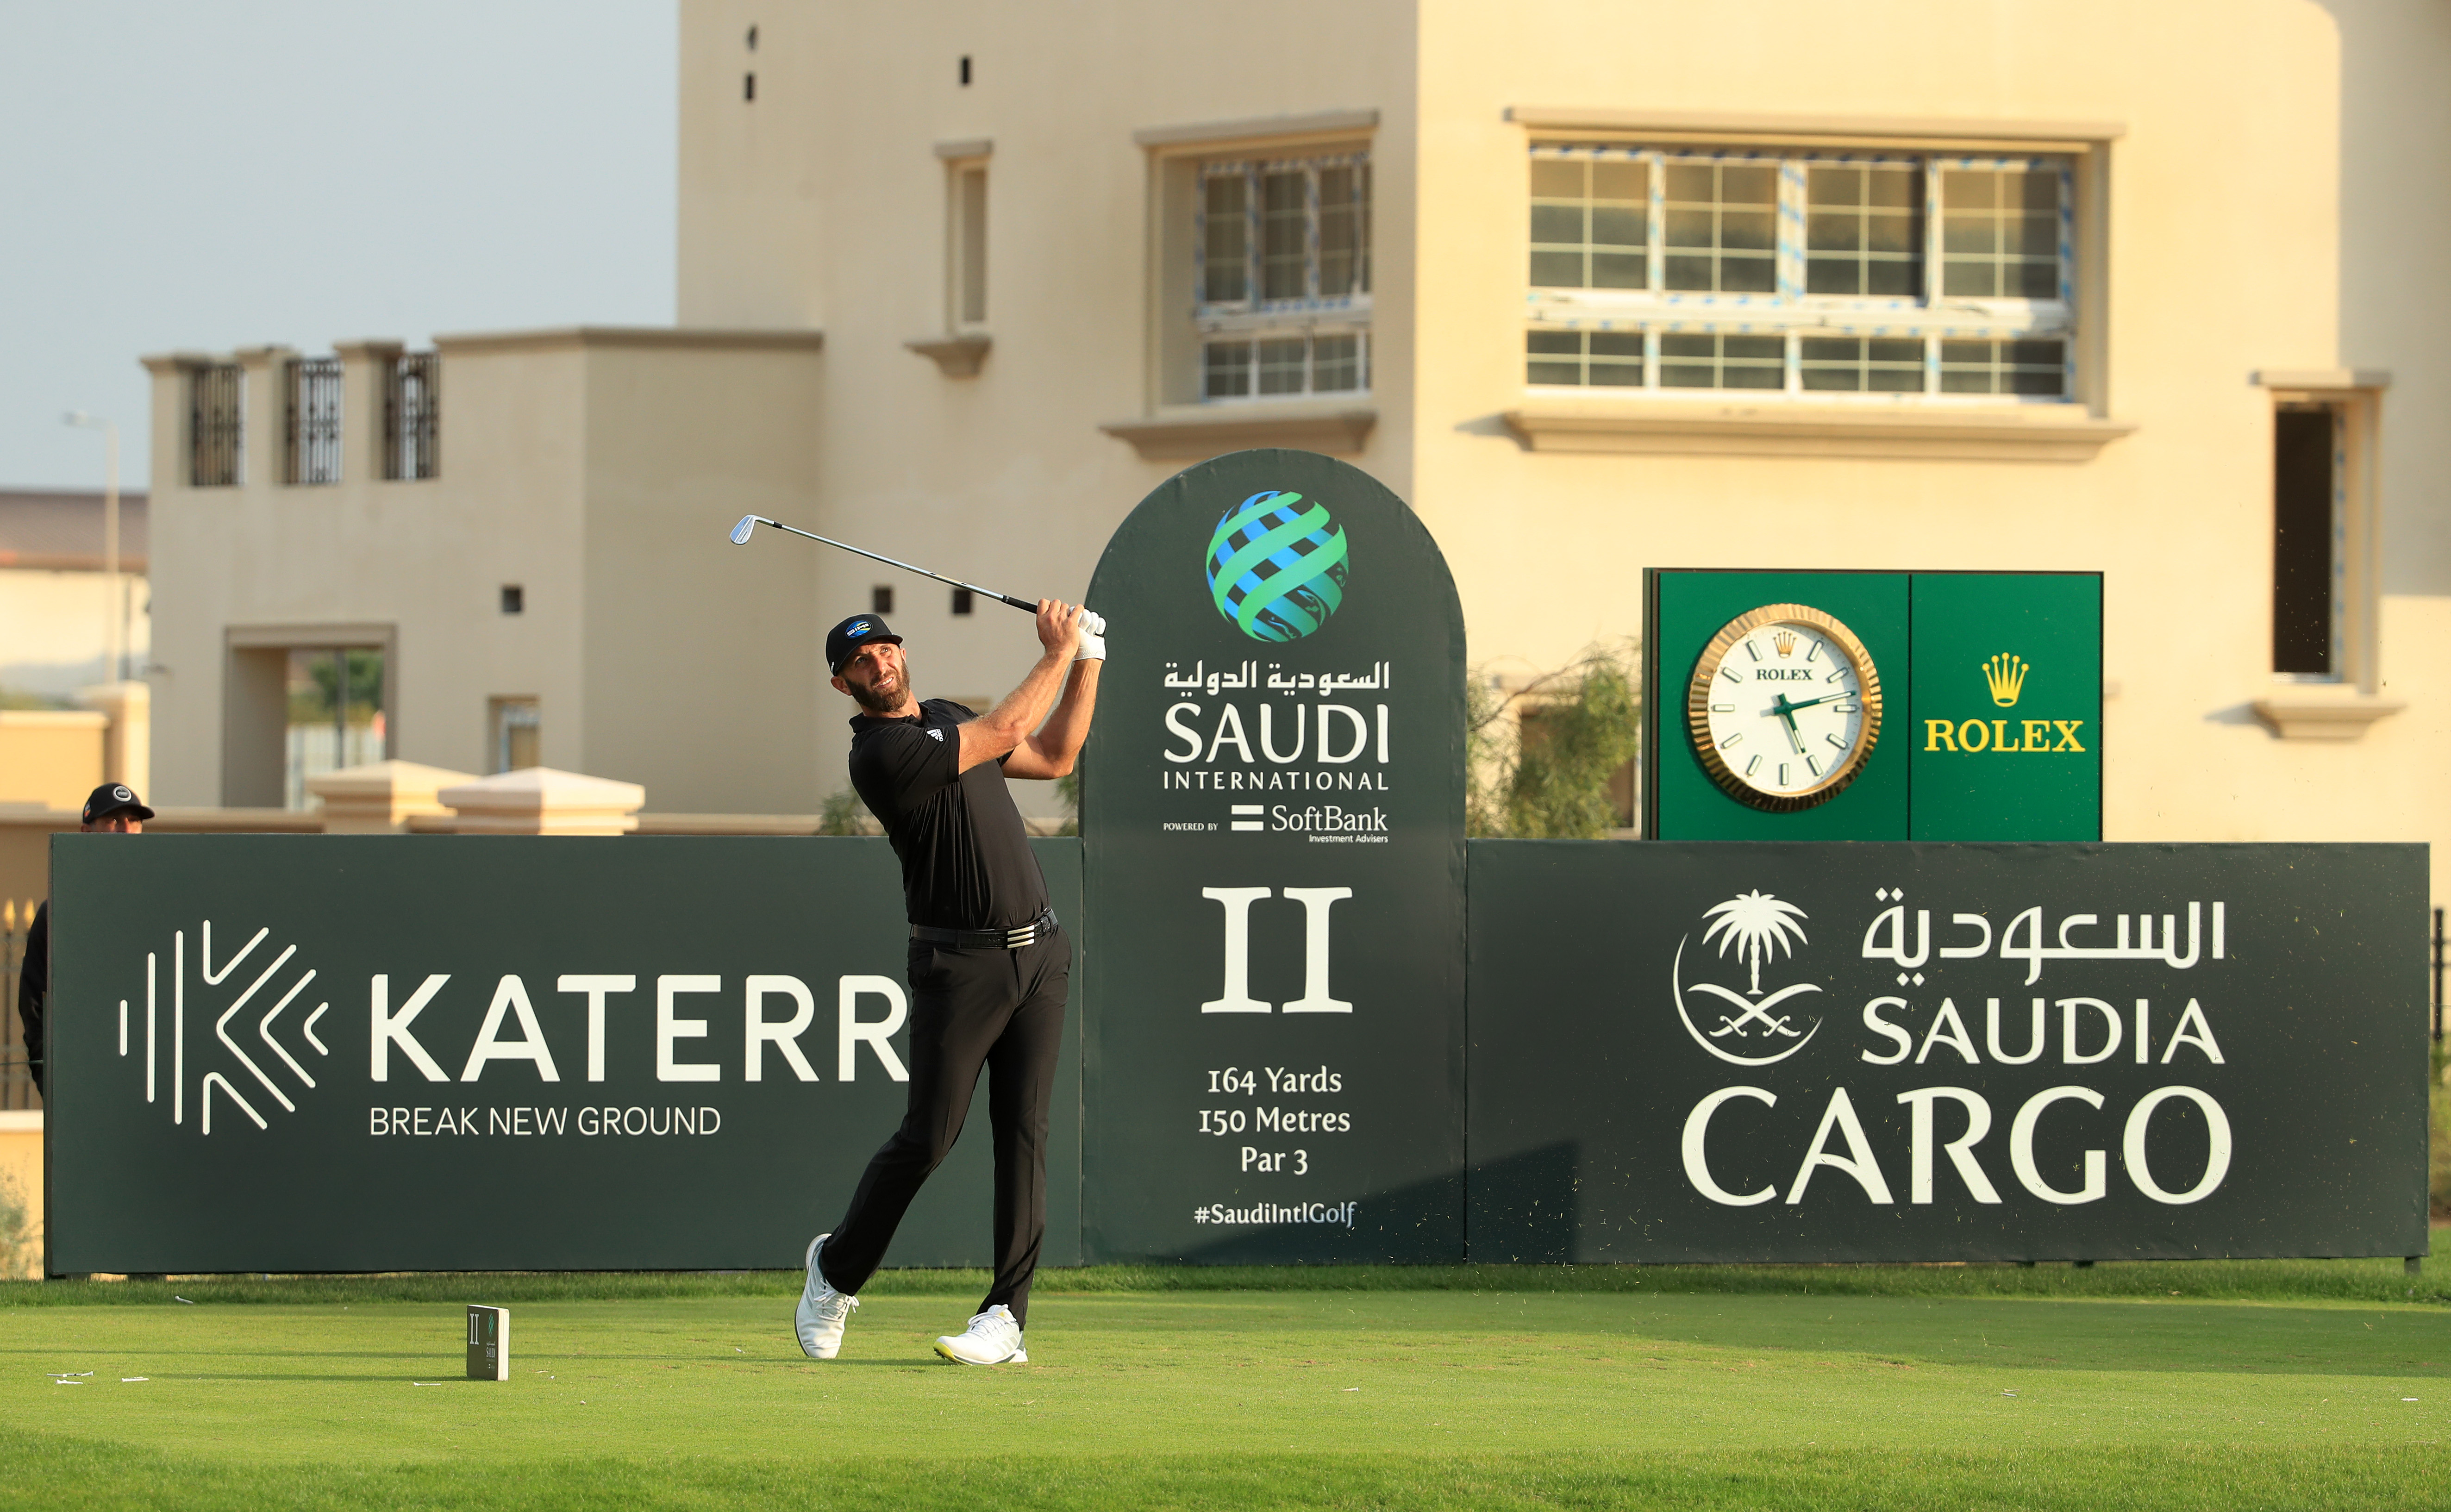 European Tour to offer $3 million to winner of season-ending event in Dubai  as part of prize-money increase to boost final three 2019 tournaments, Golf News and Tour Information